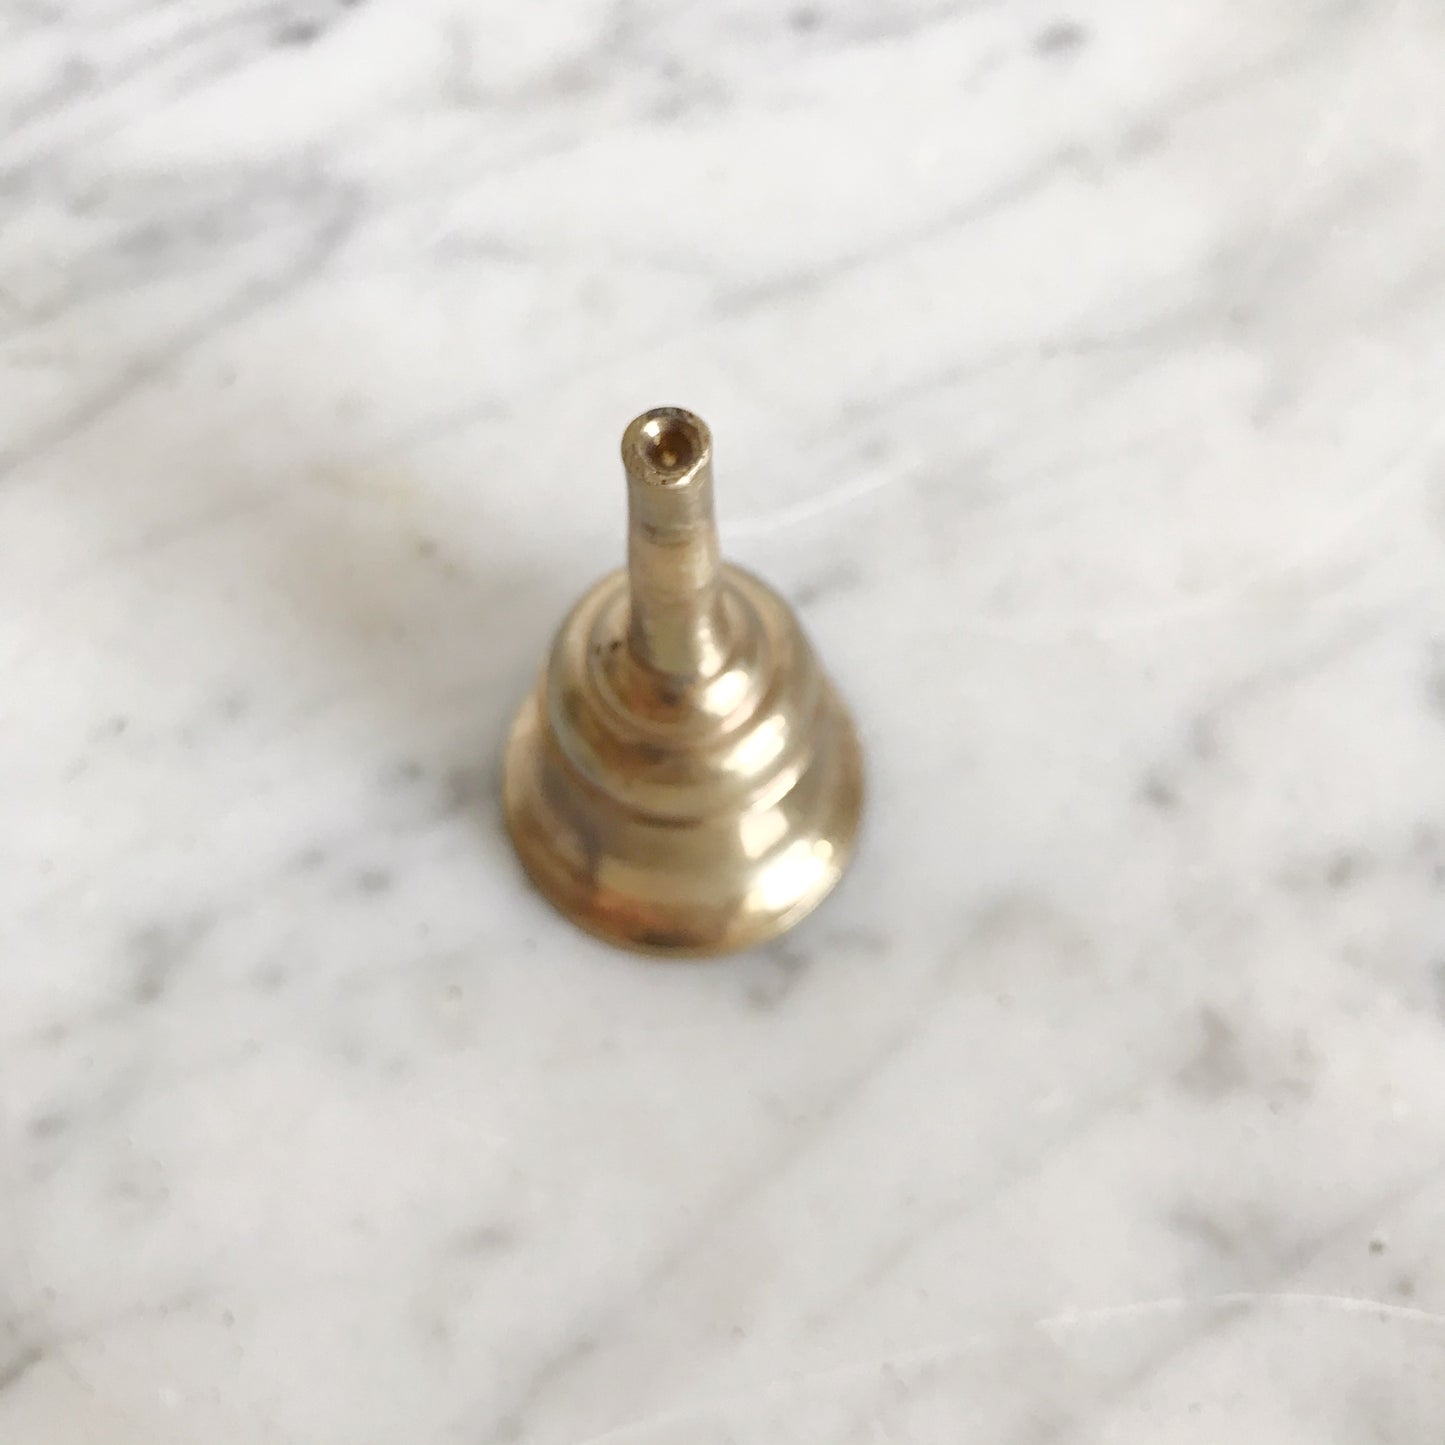 Petite Vintage Brass Candle Snuffer